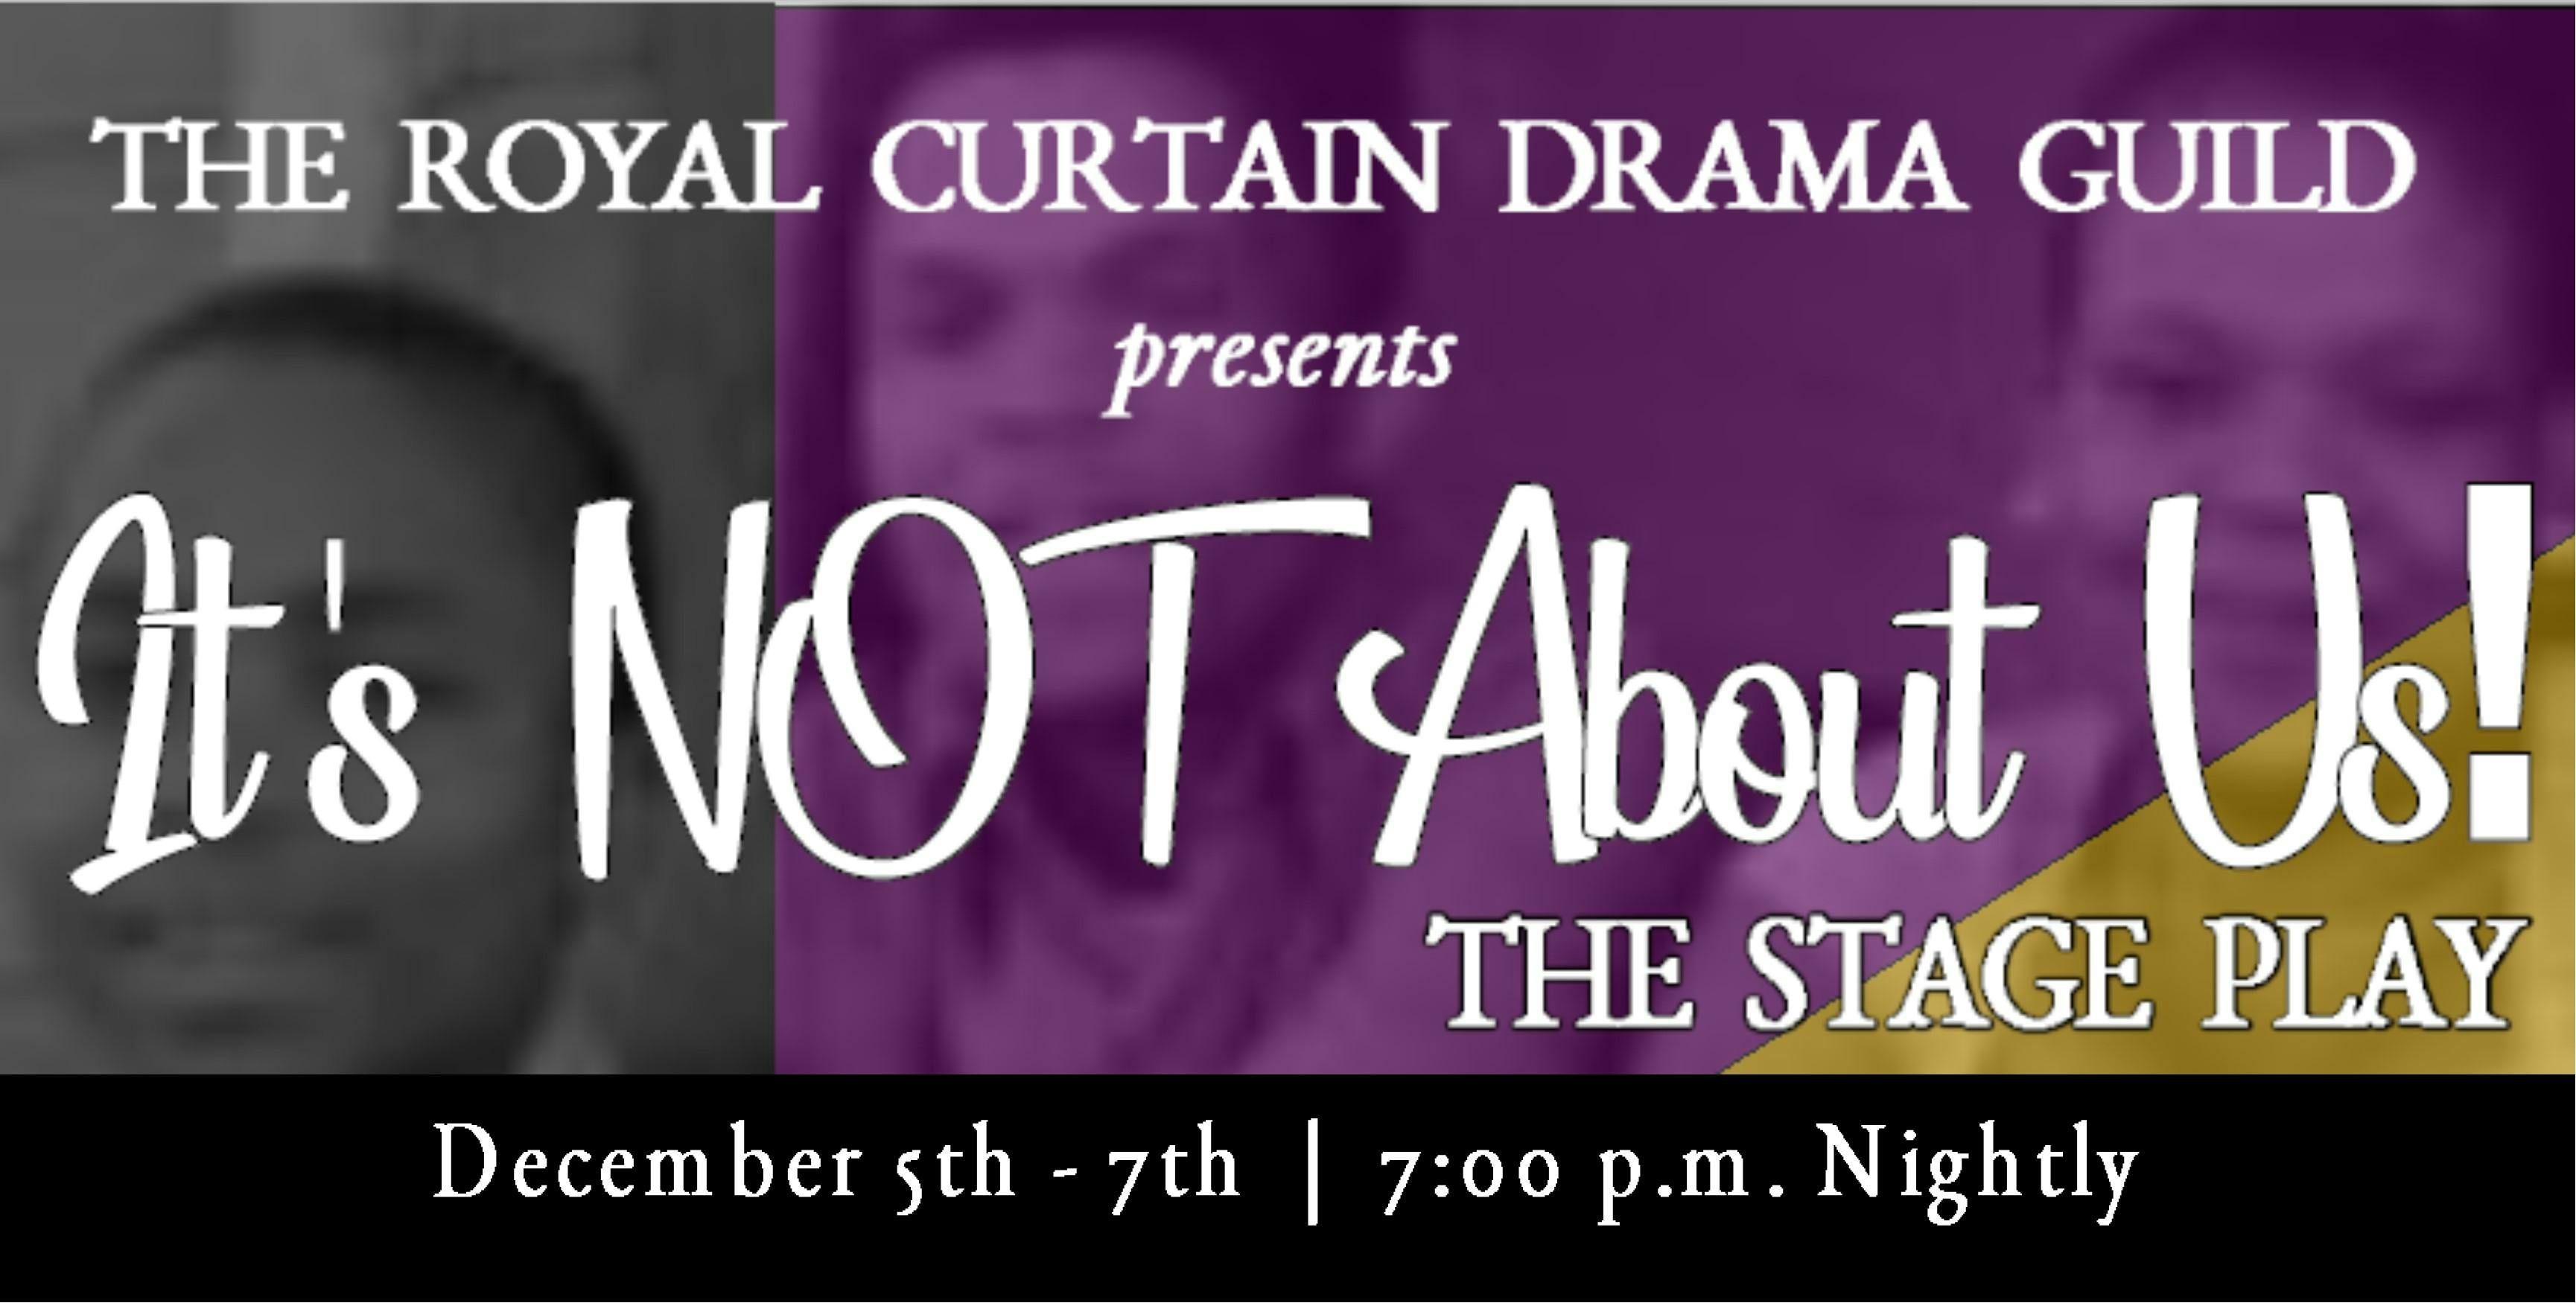 It's NOT About Us! The Stage Play